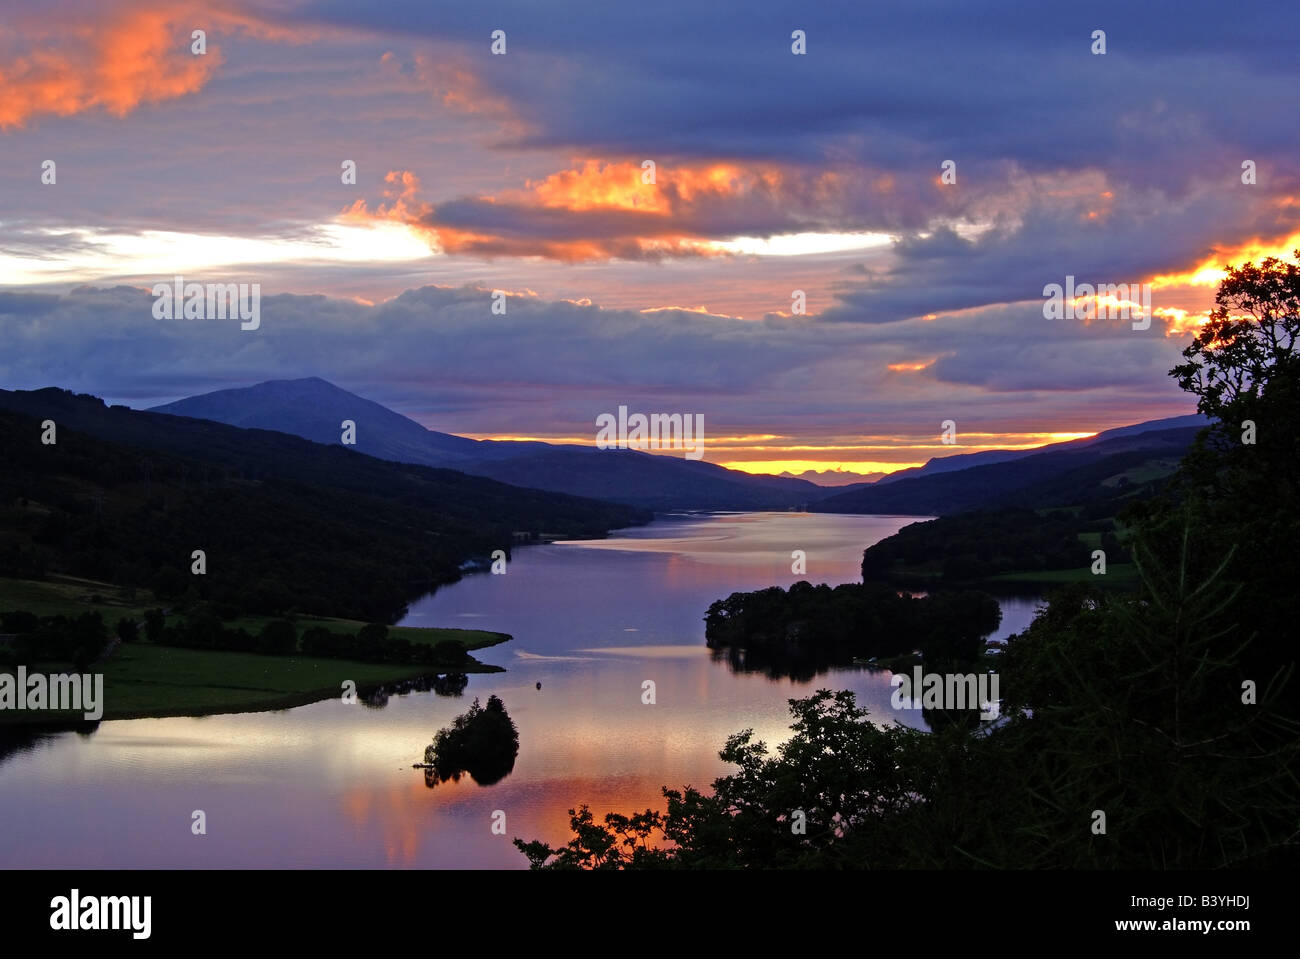 uk scotland tayside perthshire mountain of schiehallion and loch tummel from queen view at sunset Stock Photo